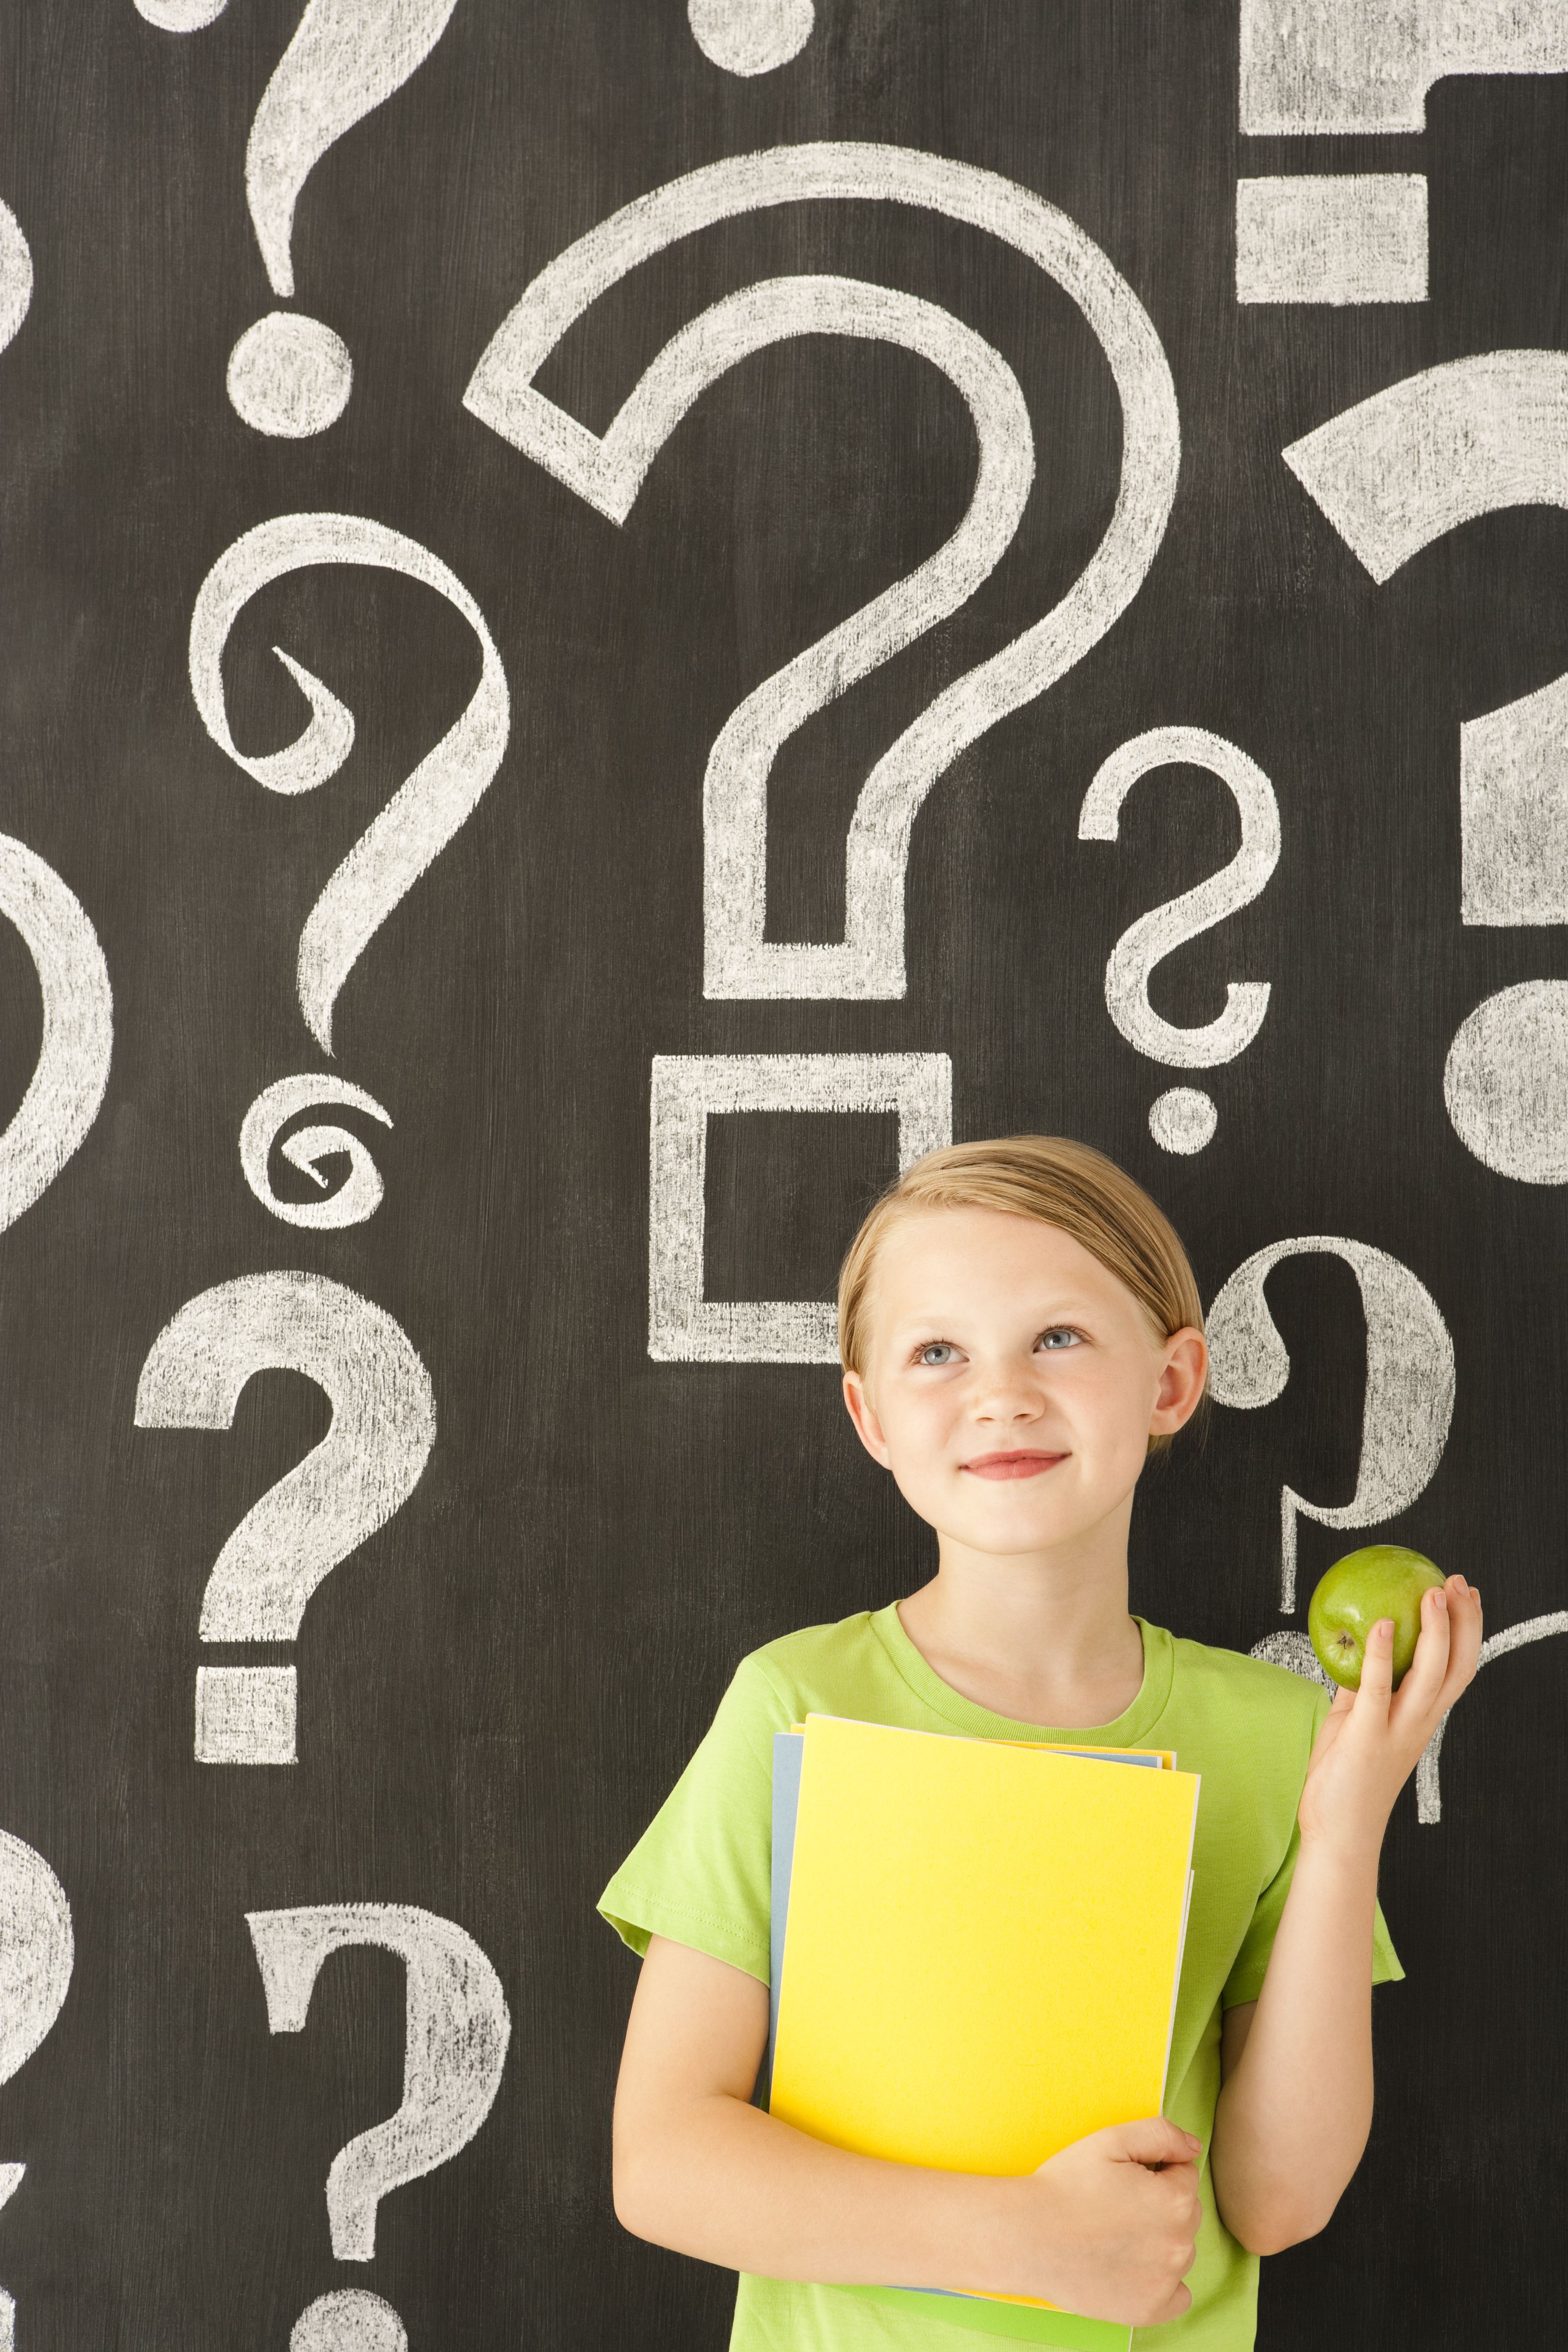 Child carrying books and an apple in front of blackboard with chalk drawn question marks